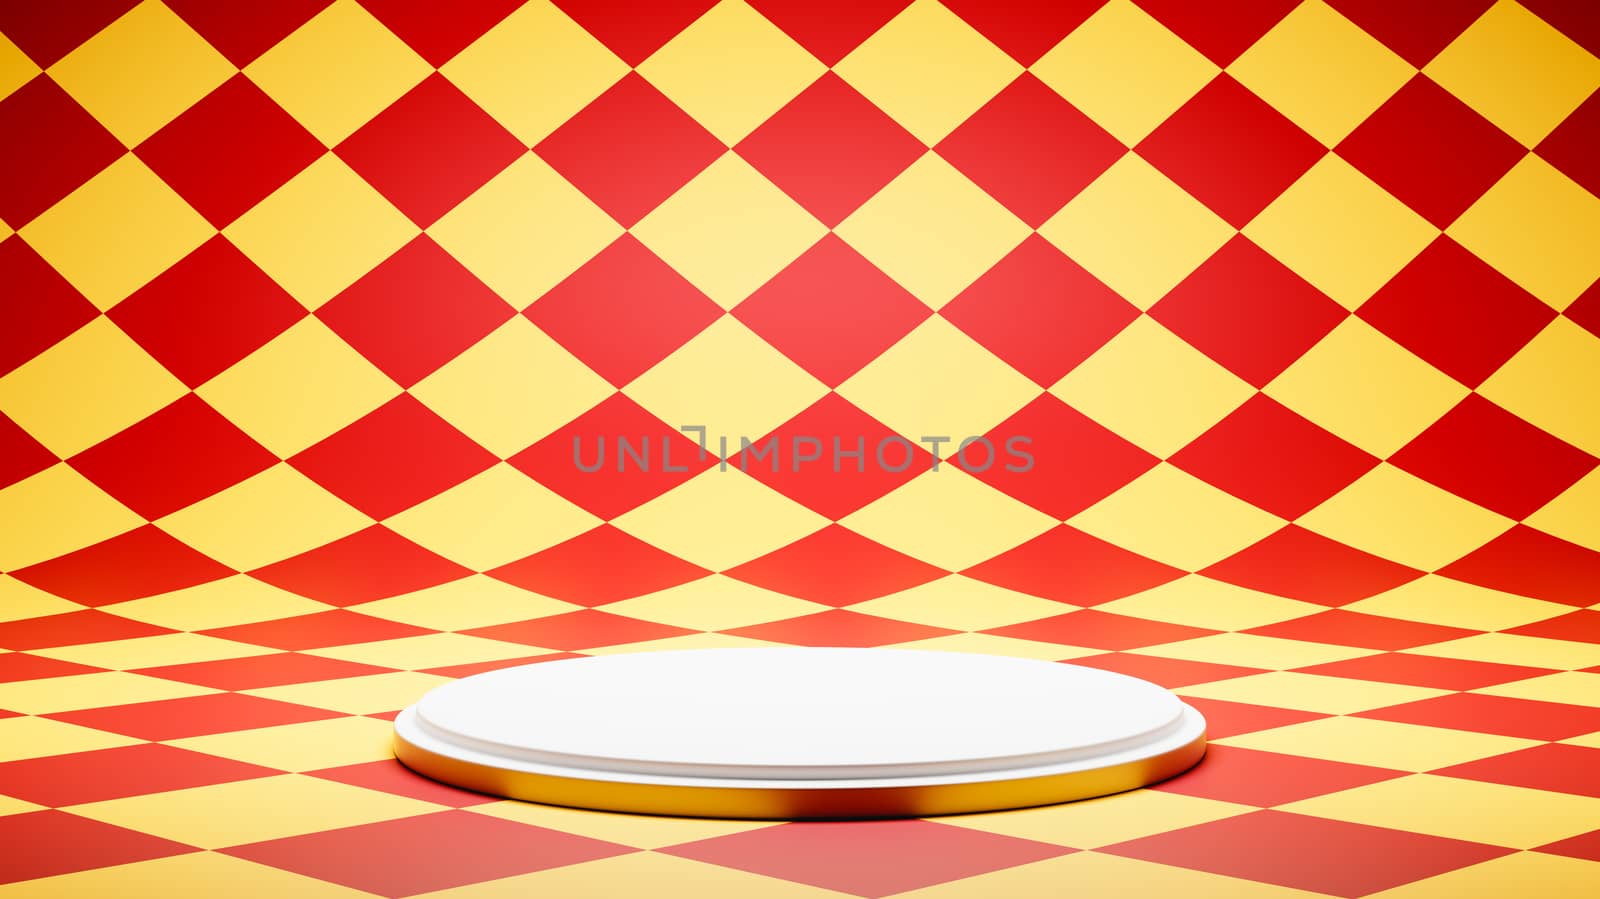 Empty White Platform on Red and Yellow Checkered Pattern Studio Background 3D Render Illustration